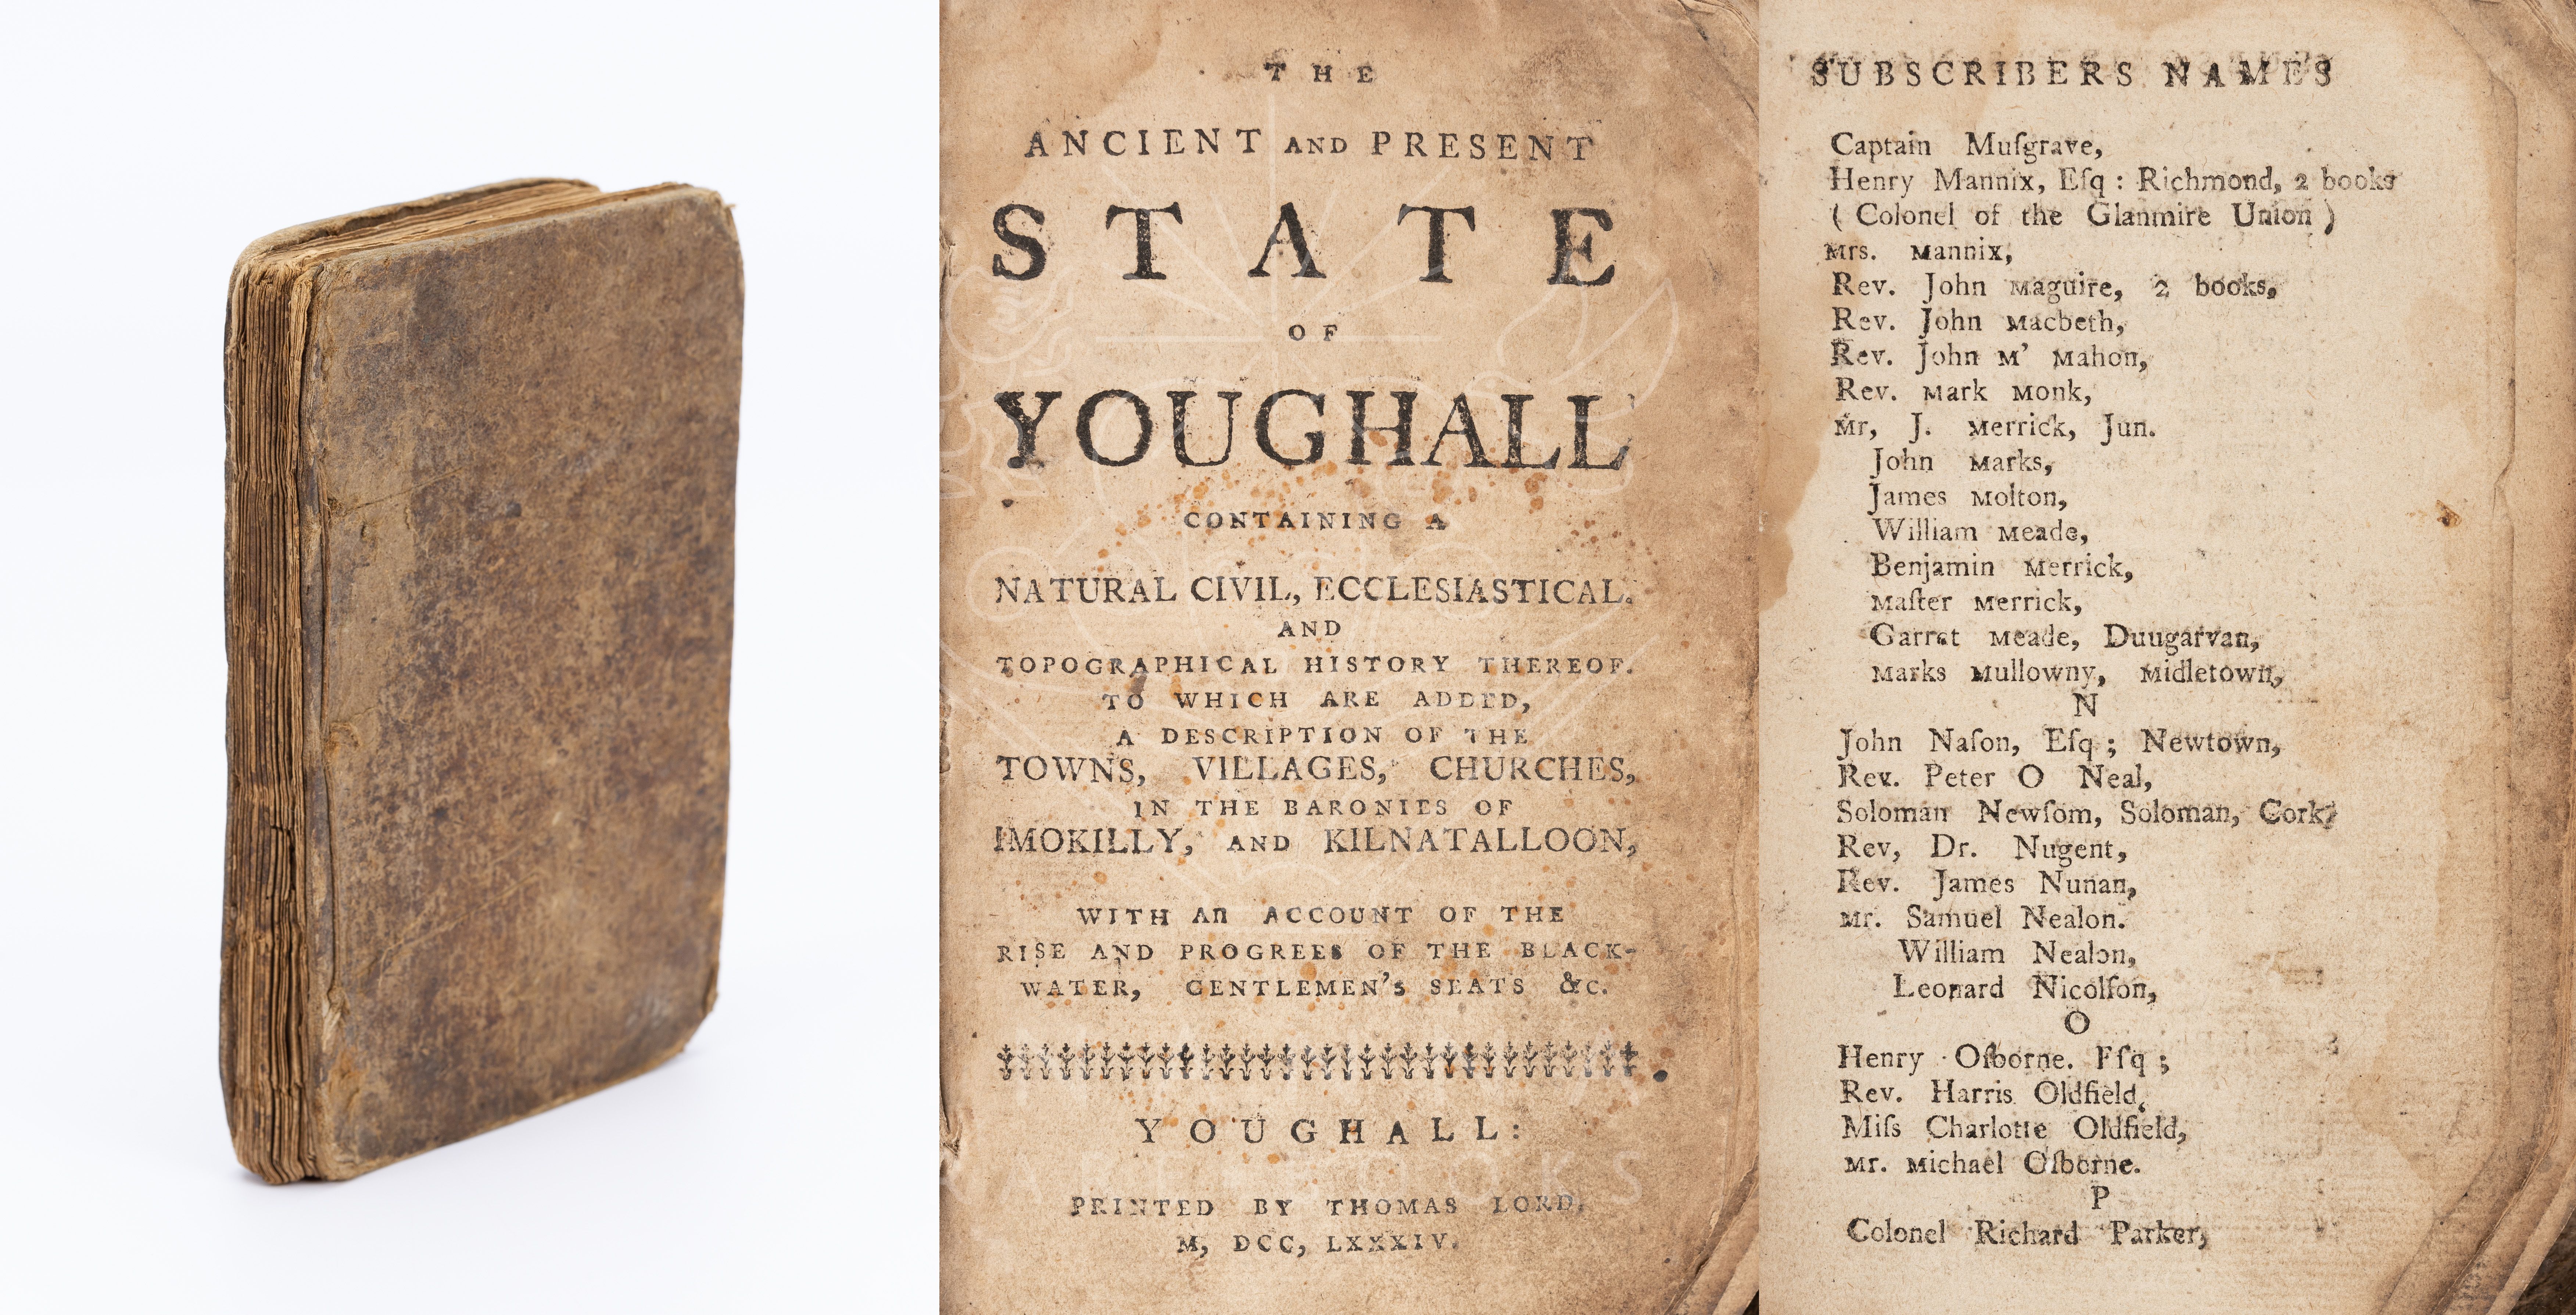 [Thomas Lord], The Ancient and Present State of Youghall [Youghal]